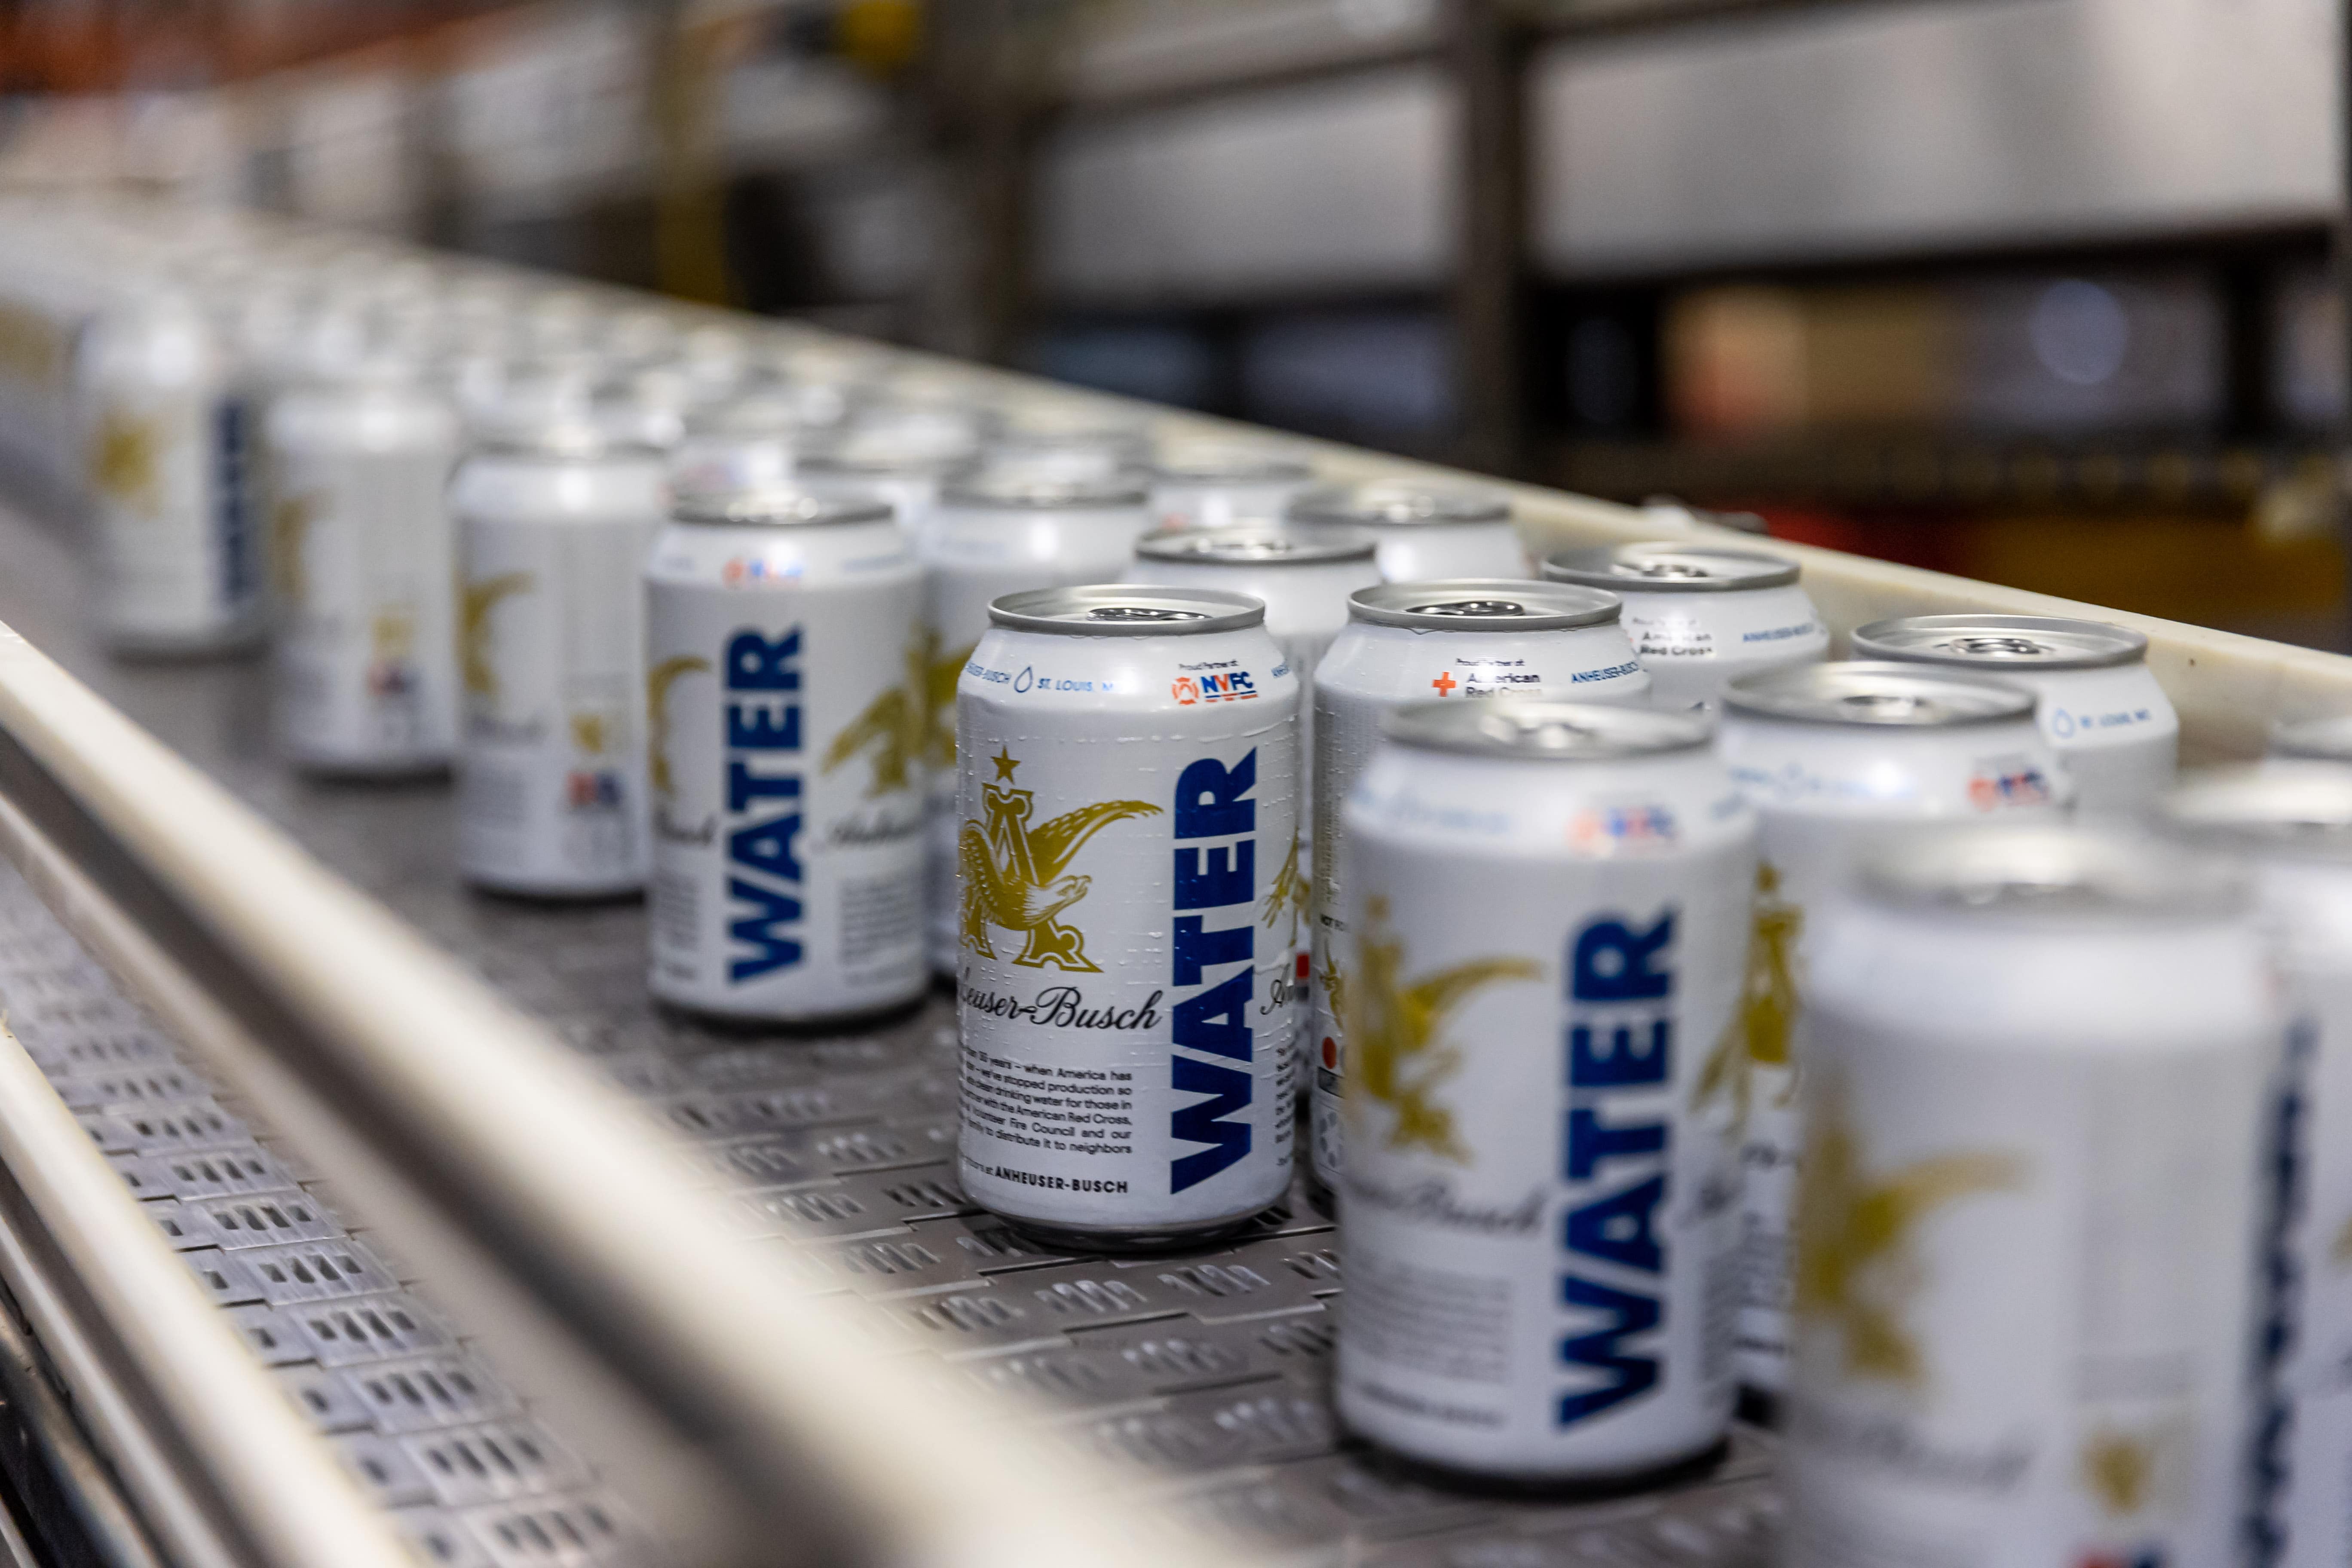 Anheuser-Busch Delivering 50,000 Cans of Emergency Drinking Water to Support Flood Relief Efforts in St. Louis